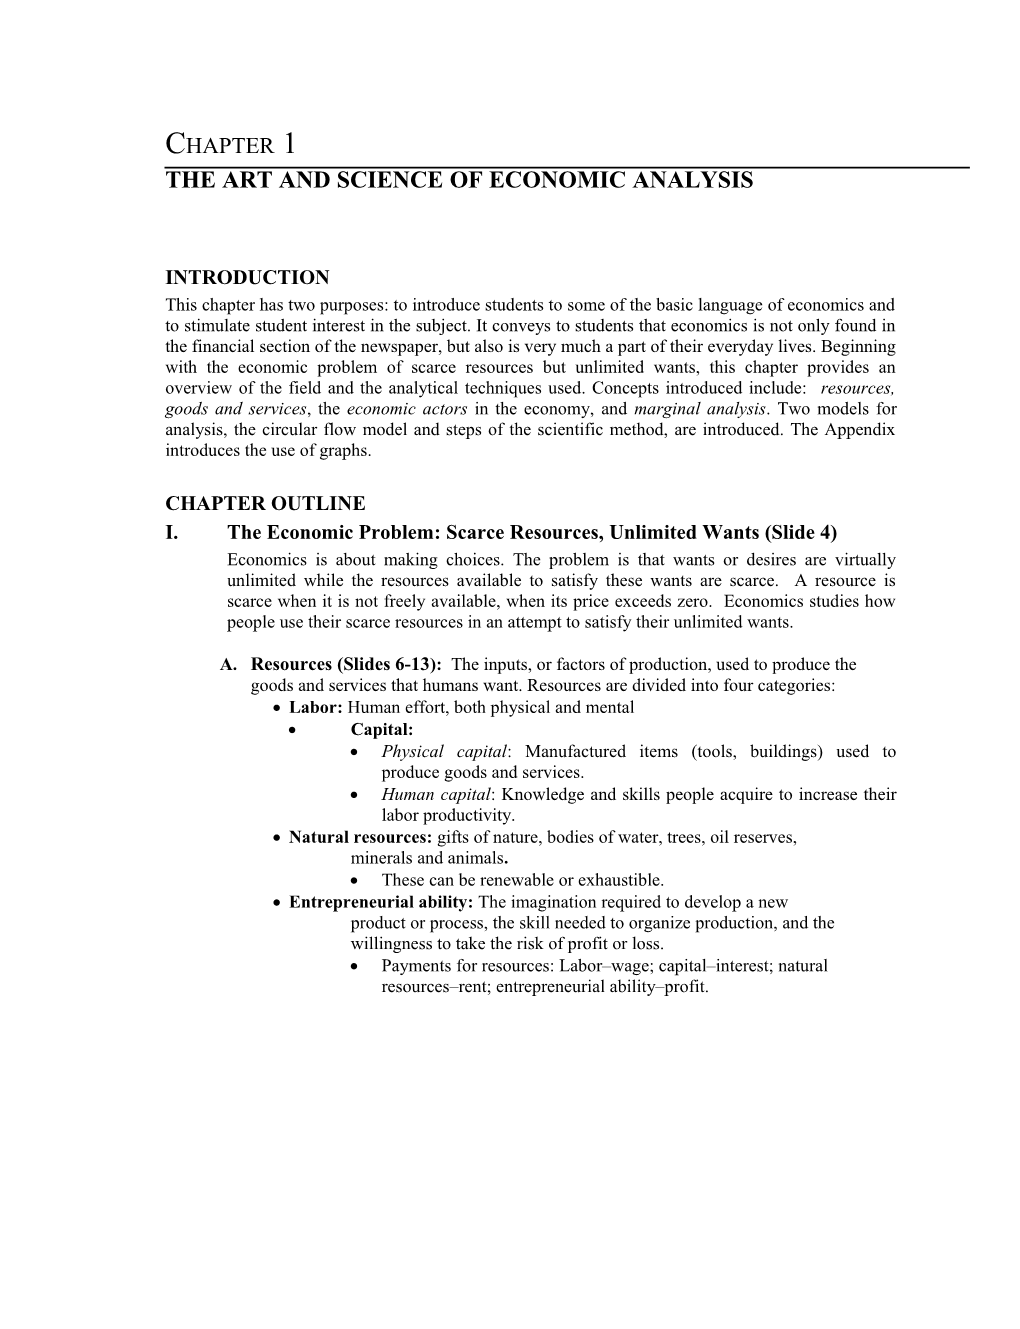 The Art and Science of Economic Analysis